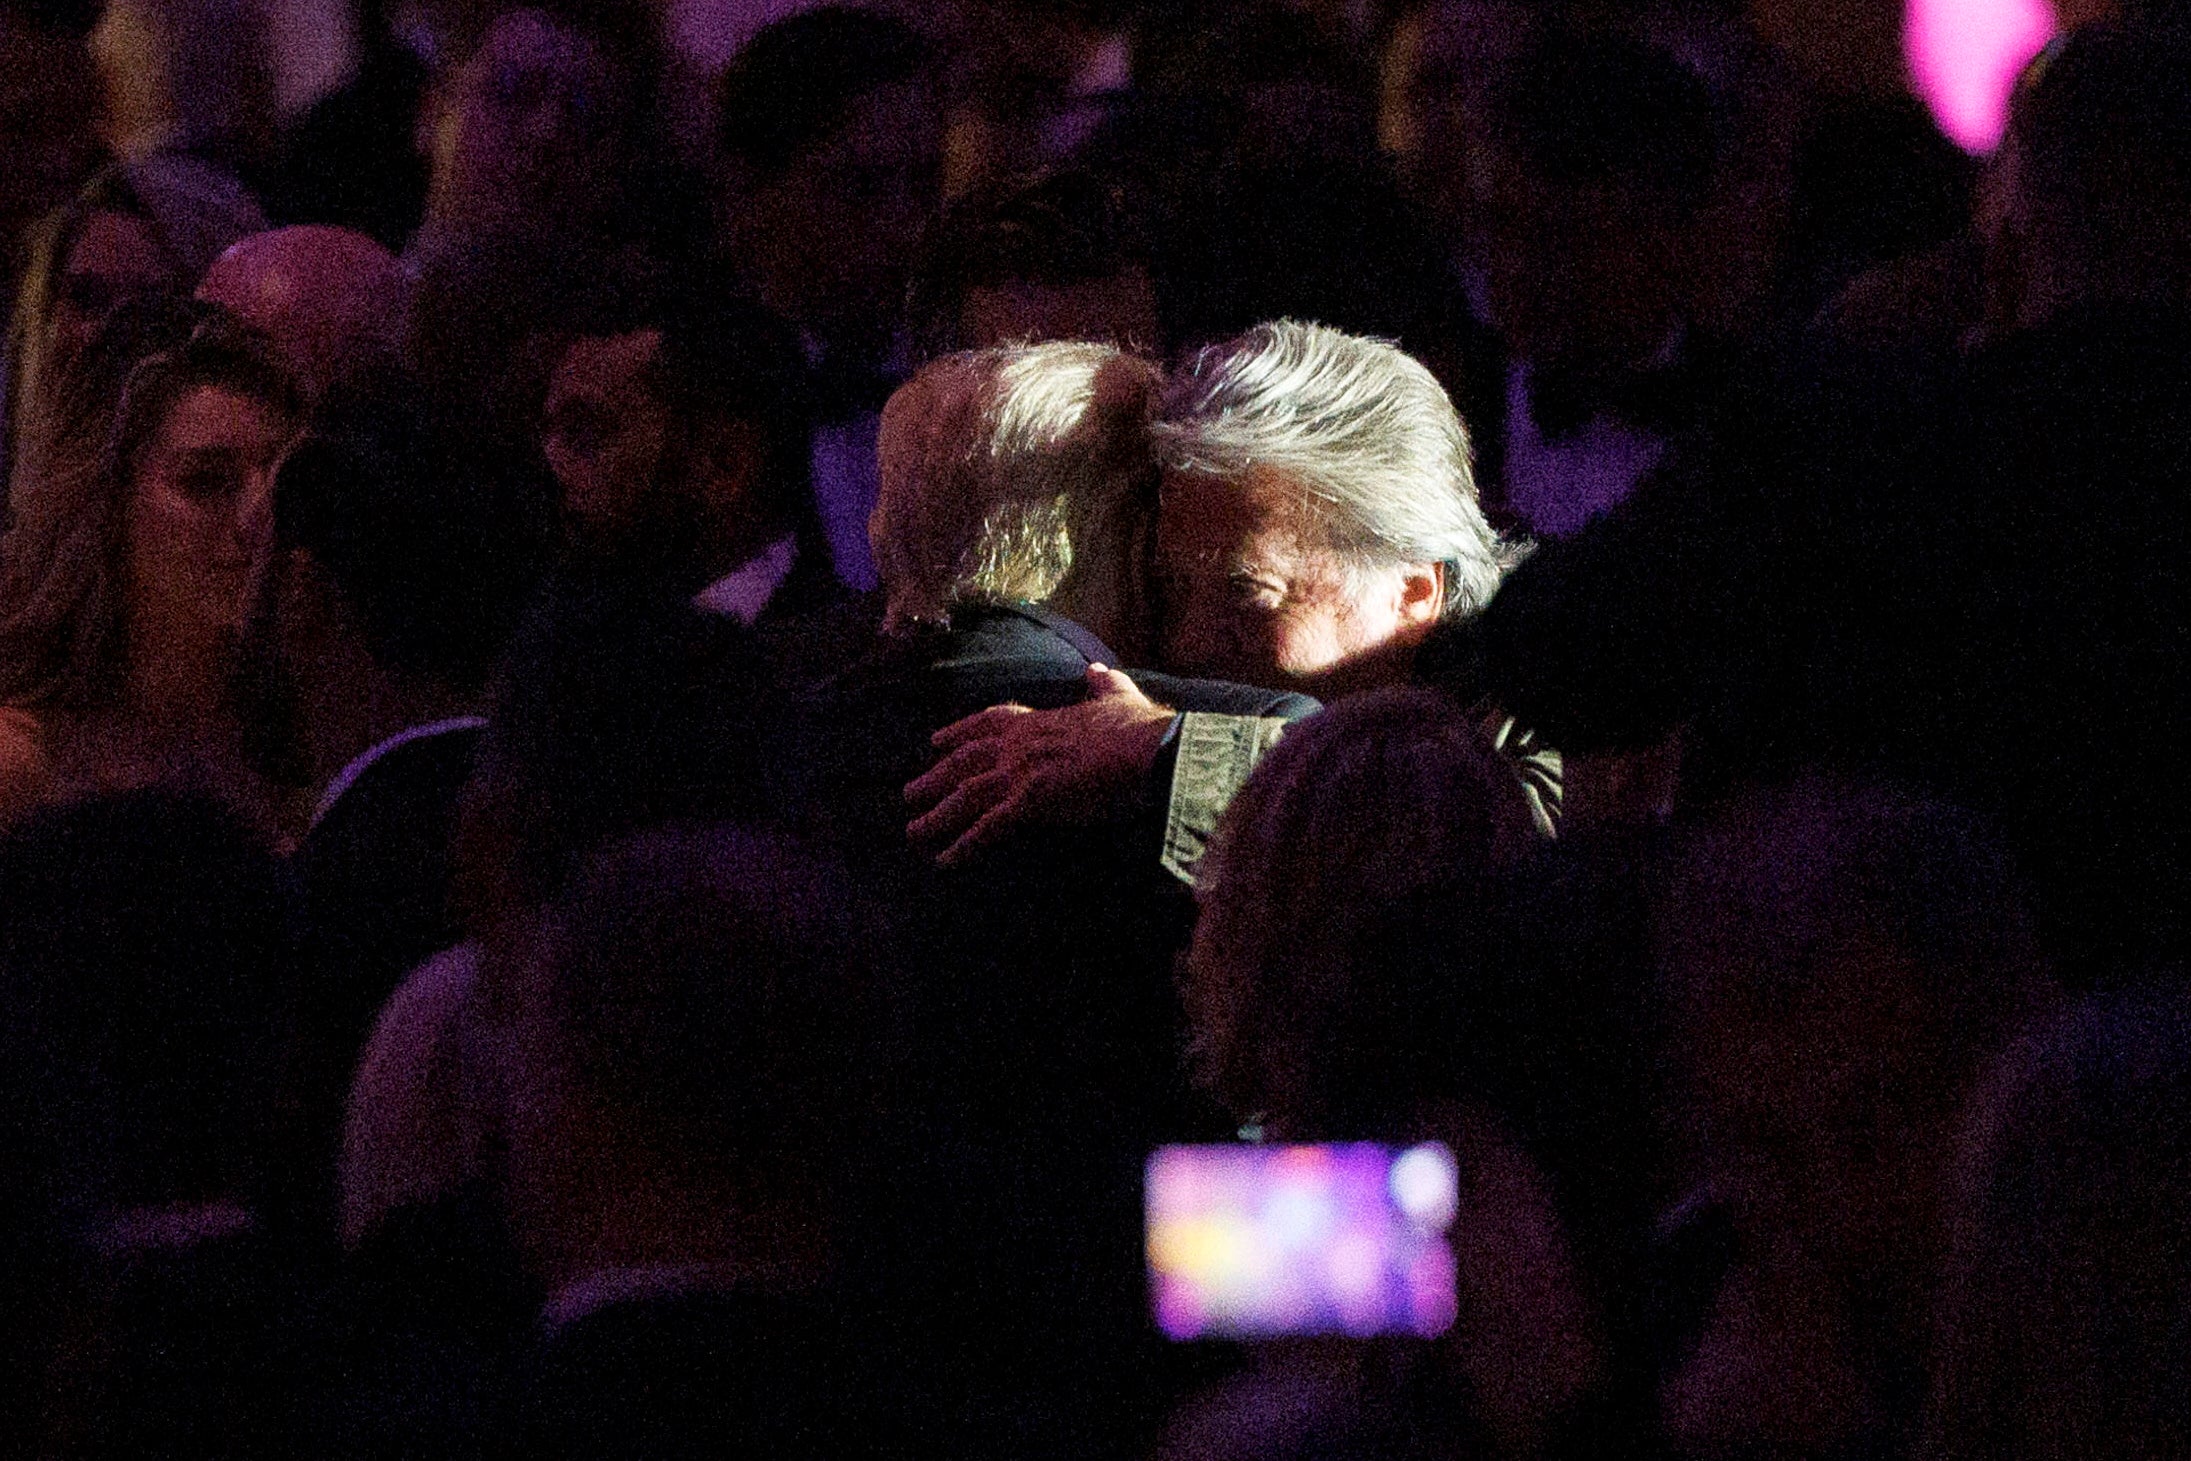 Donald Trump hugs his former chief strategist Steve Bannon at a New York Young Republicans gala on 9 December